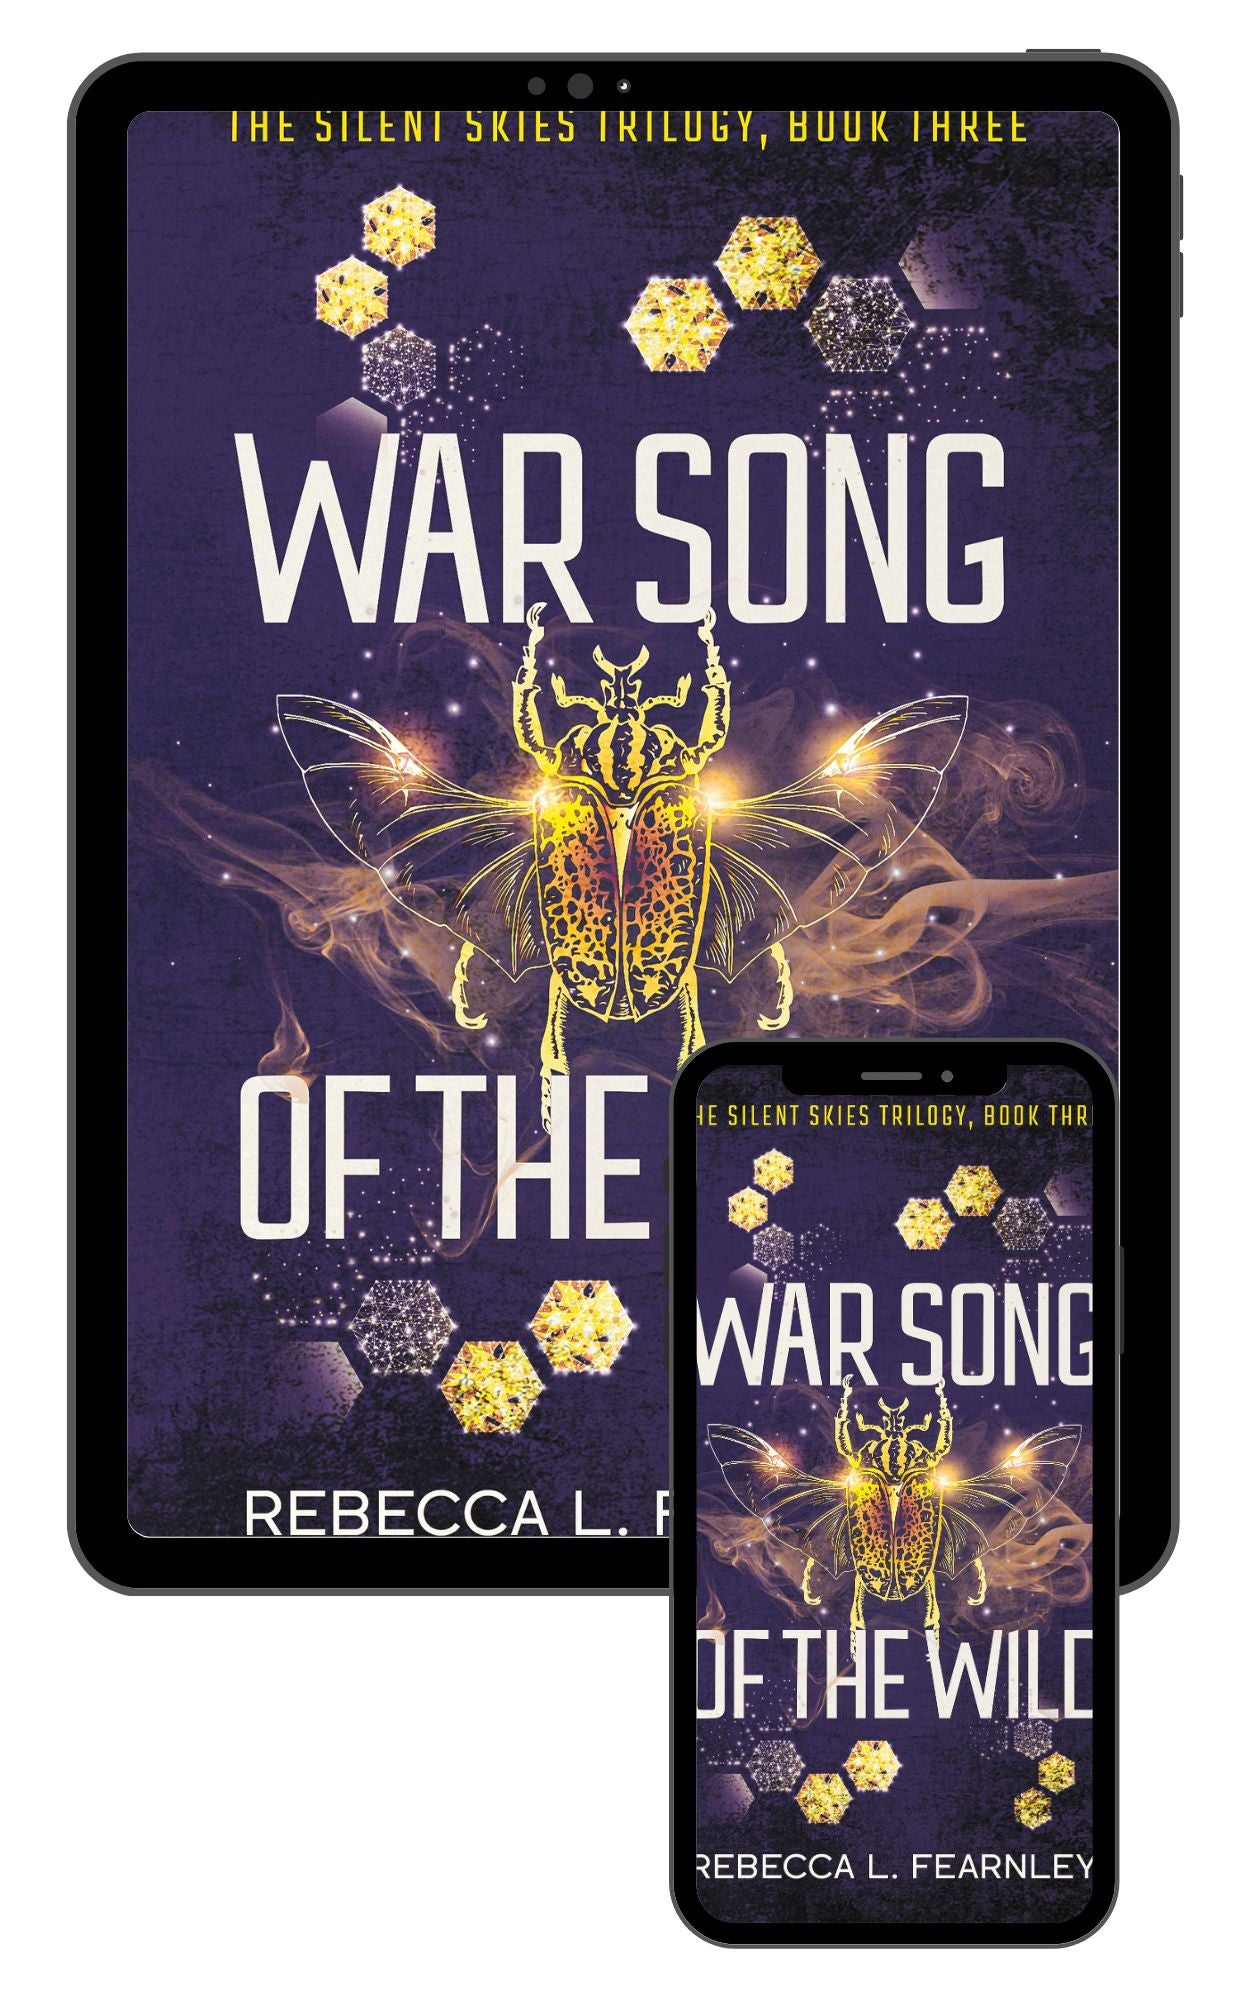 War Song of the Wild: Book three in the Silent Skies Trilogy